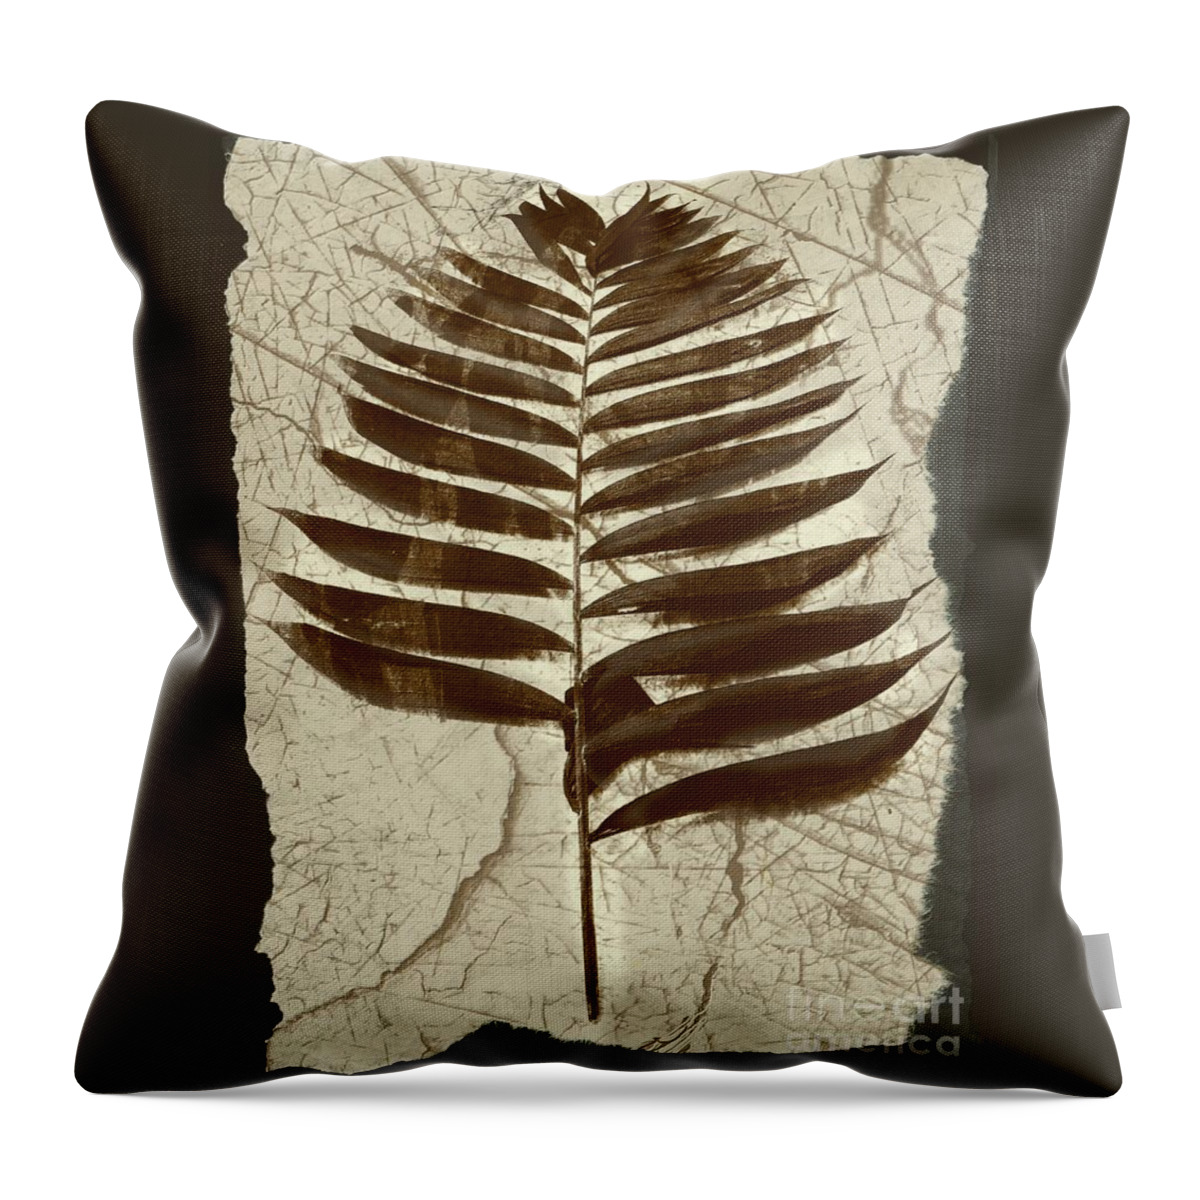 Photograph Throw Pillow featuring the digital art Palm Fossil Sandstone by Delynn Addams